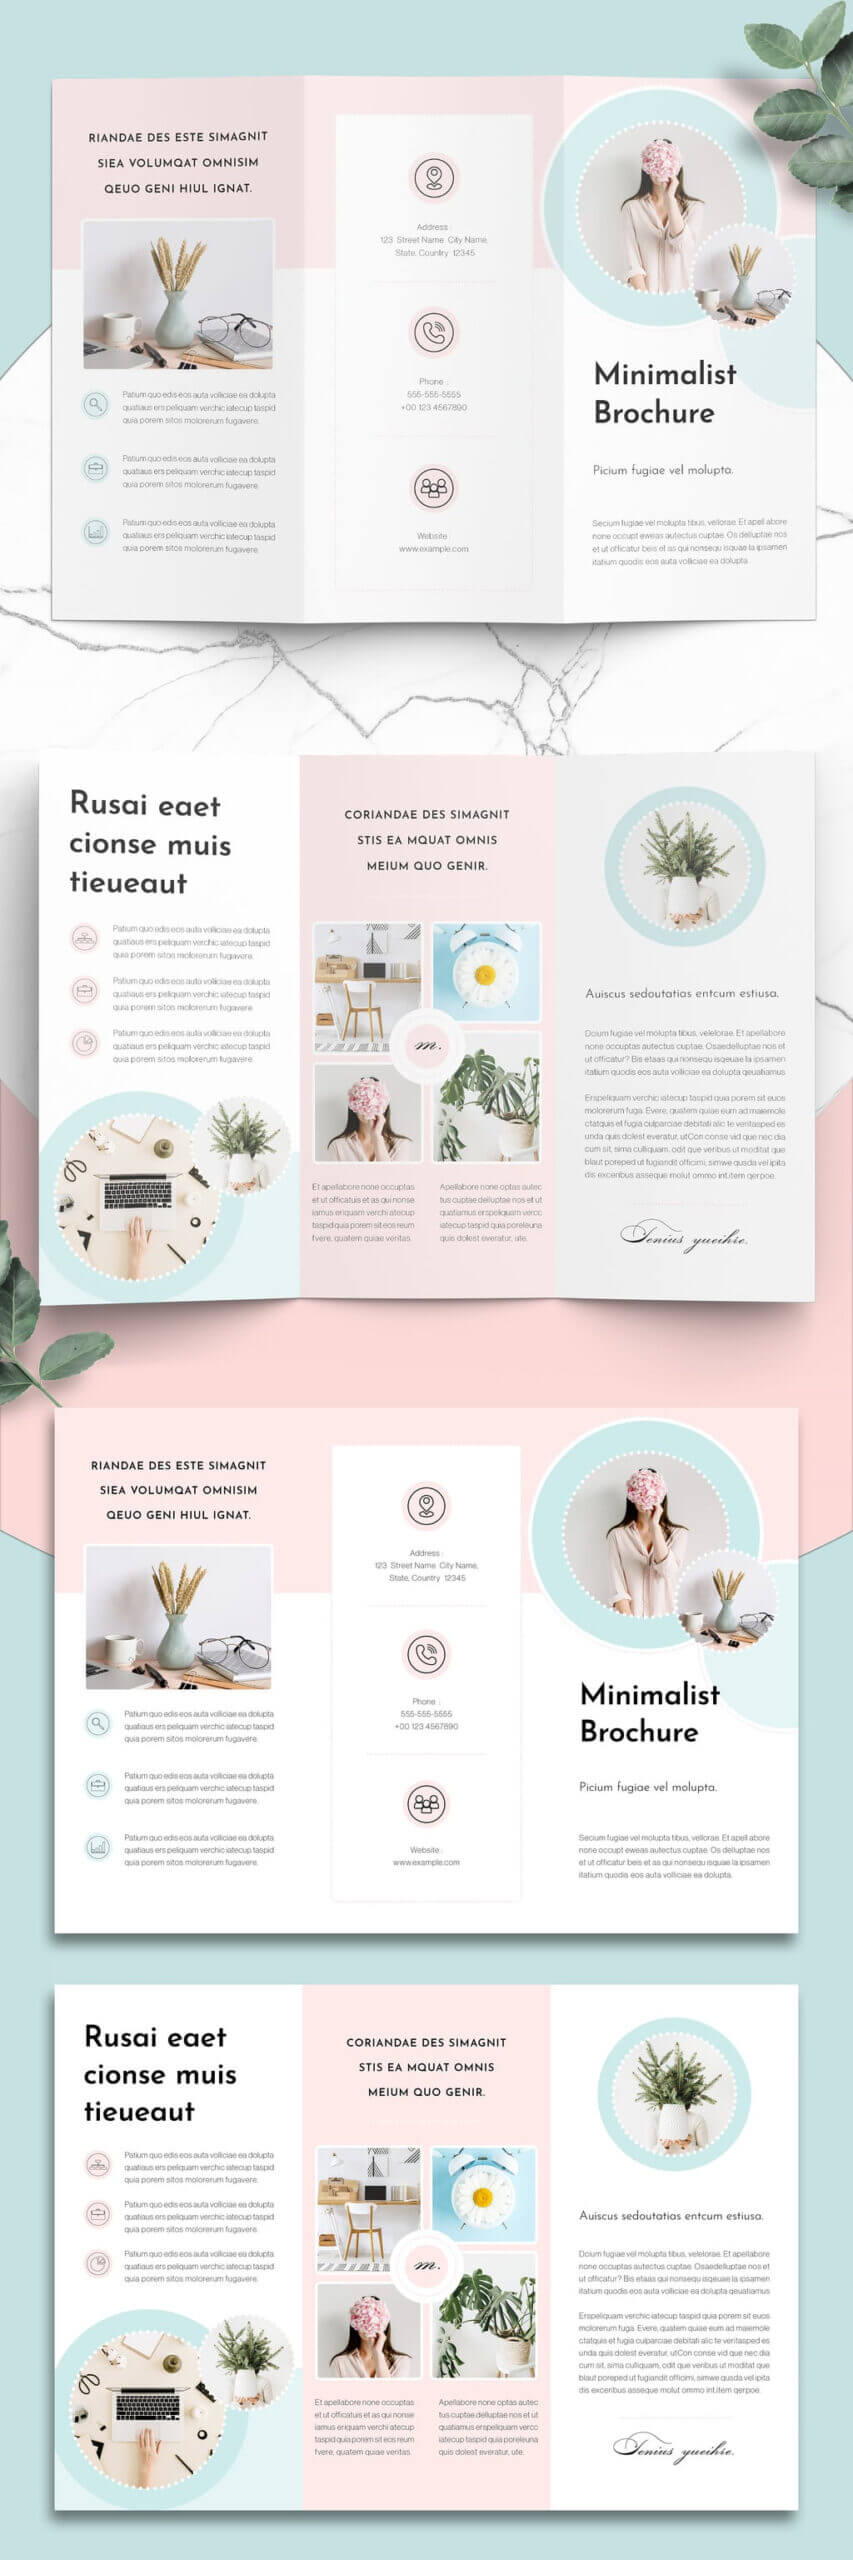 100 Best Indesign Brochure Templates Inside Country Brochure Template